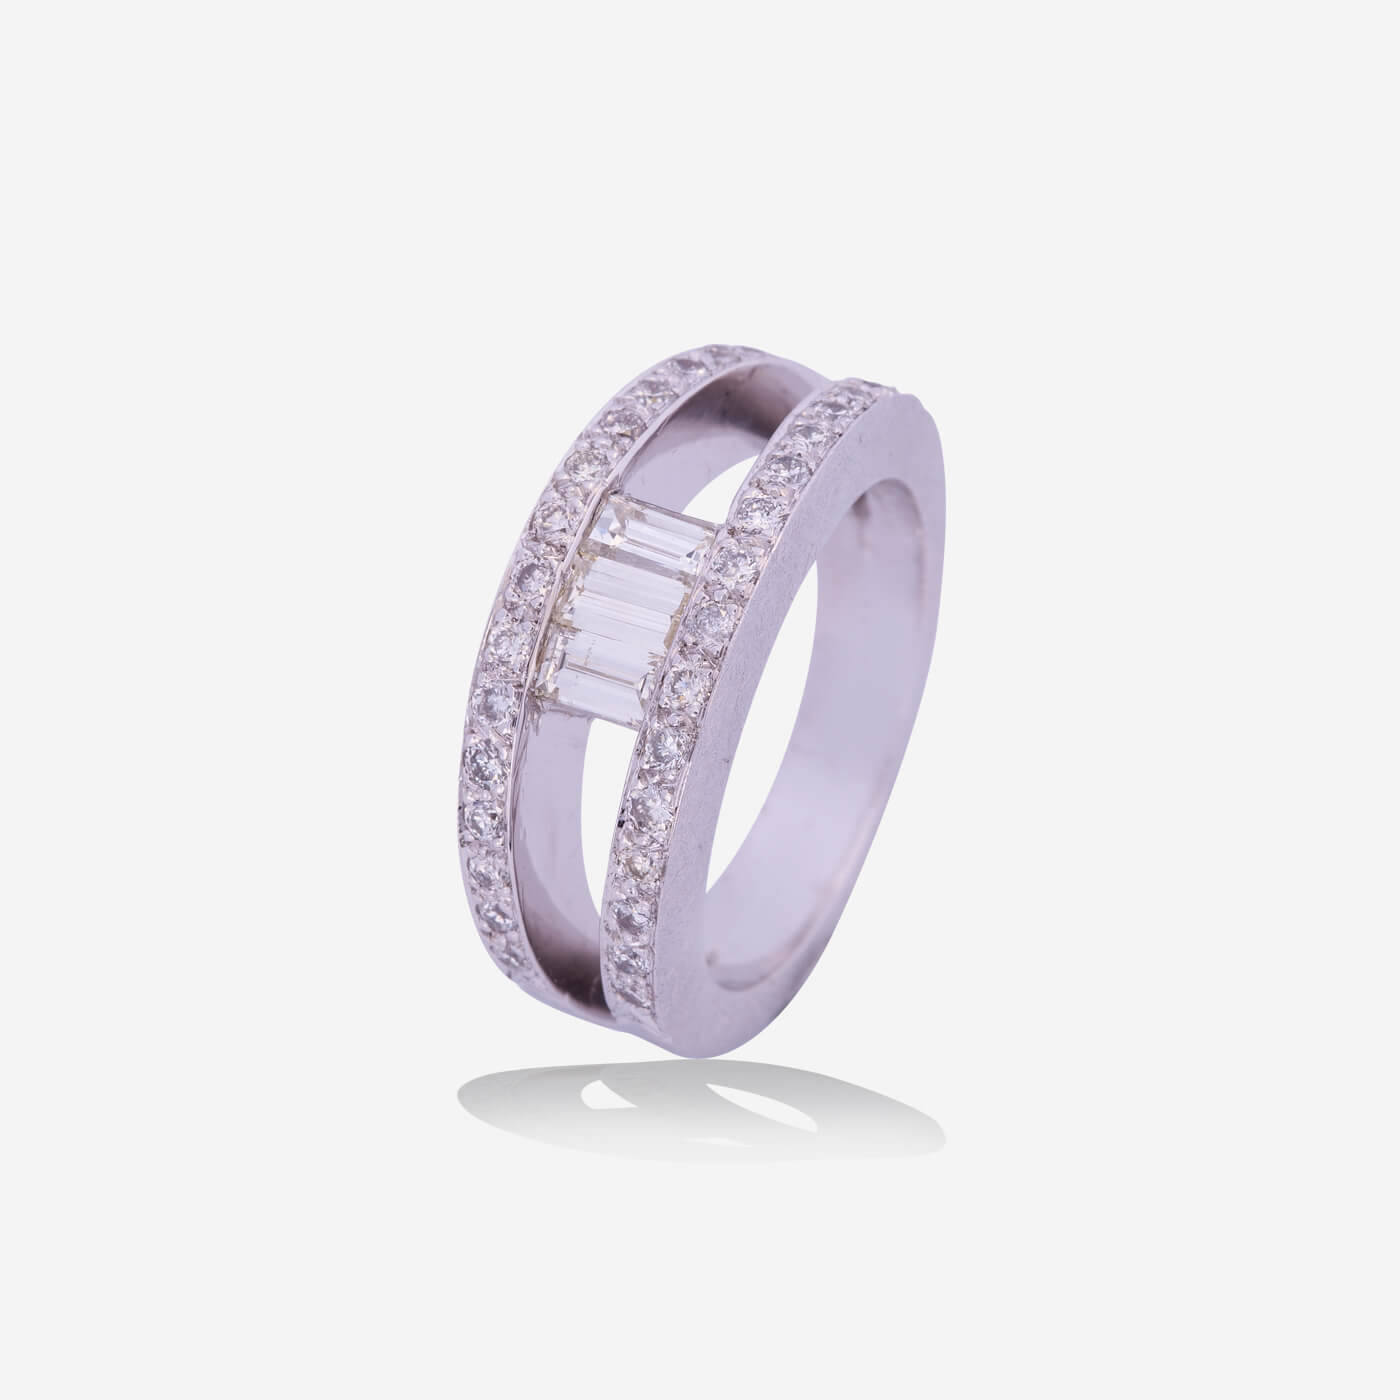 White Gold 1 Baguette in Diamonds Bands Ring - Ref: RY03094